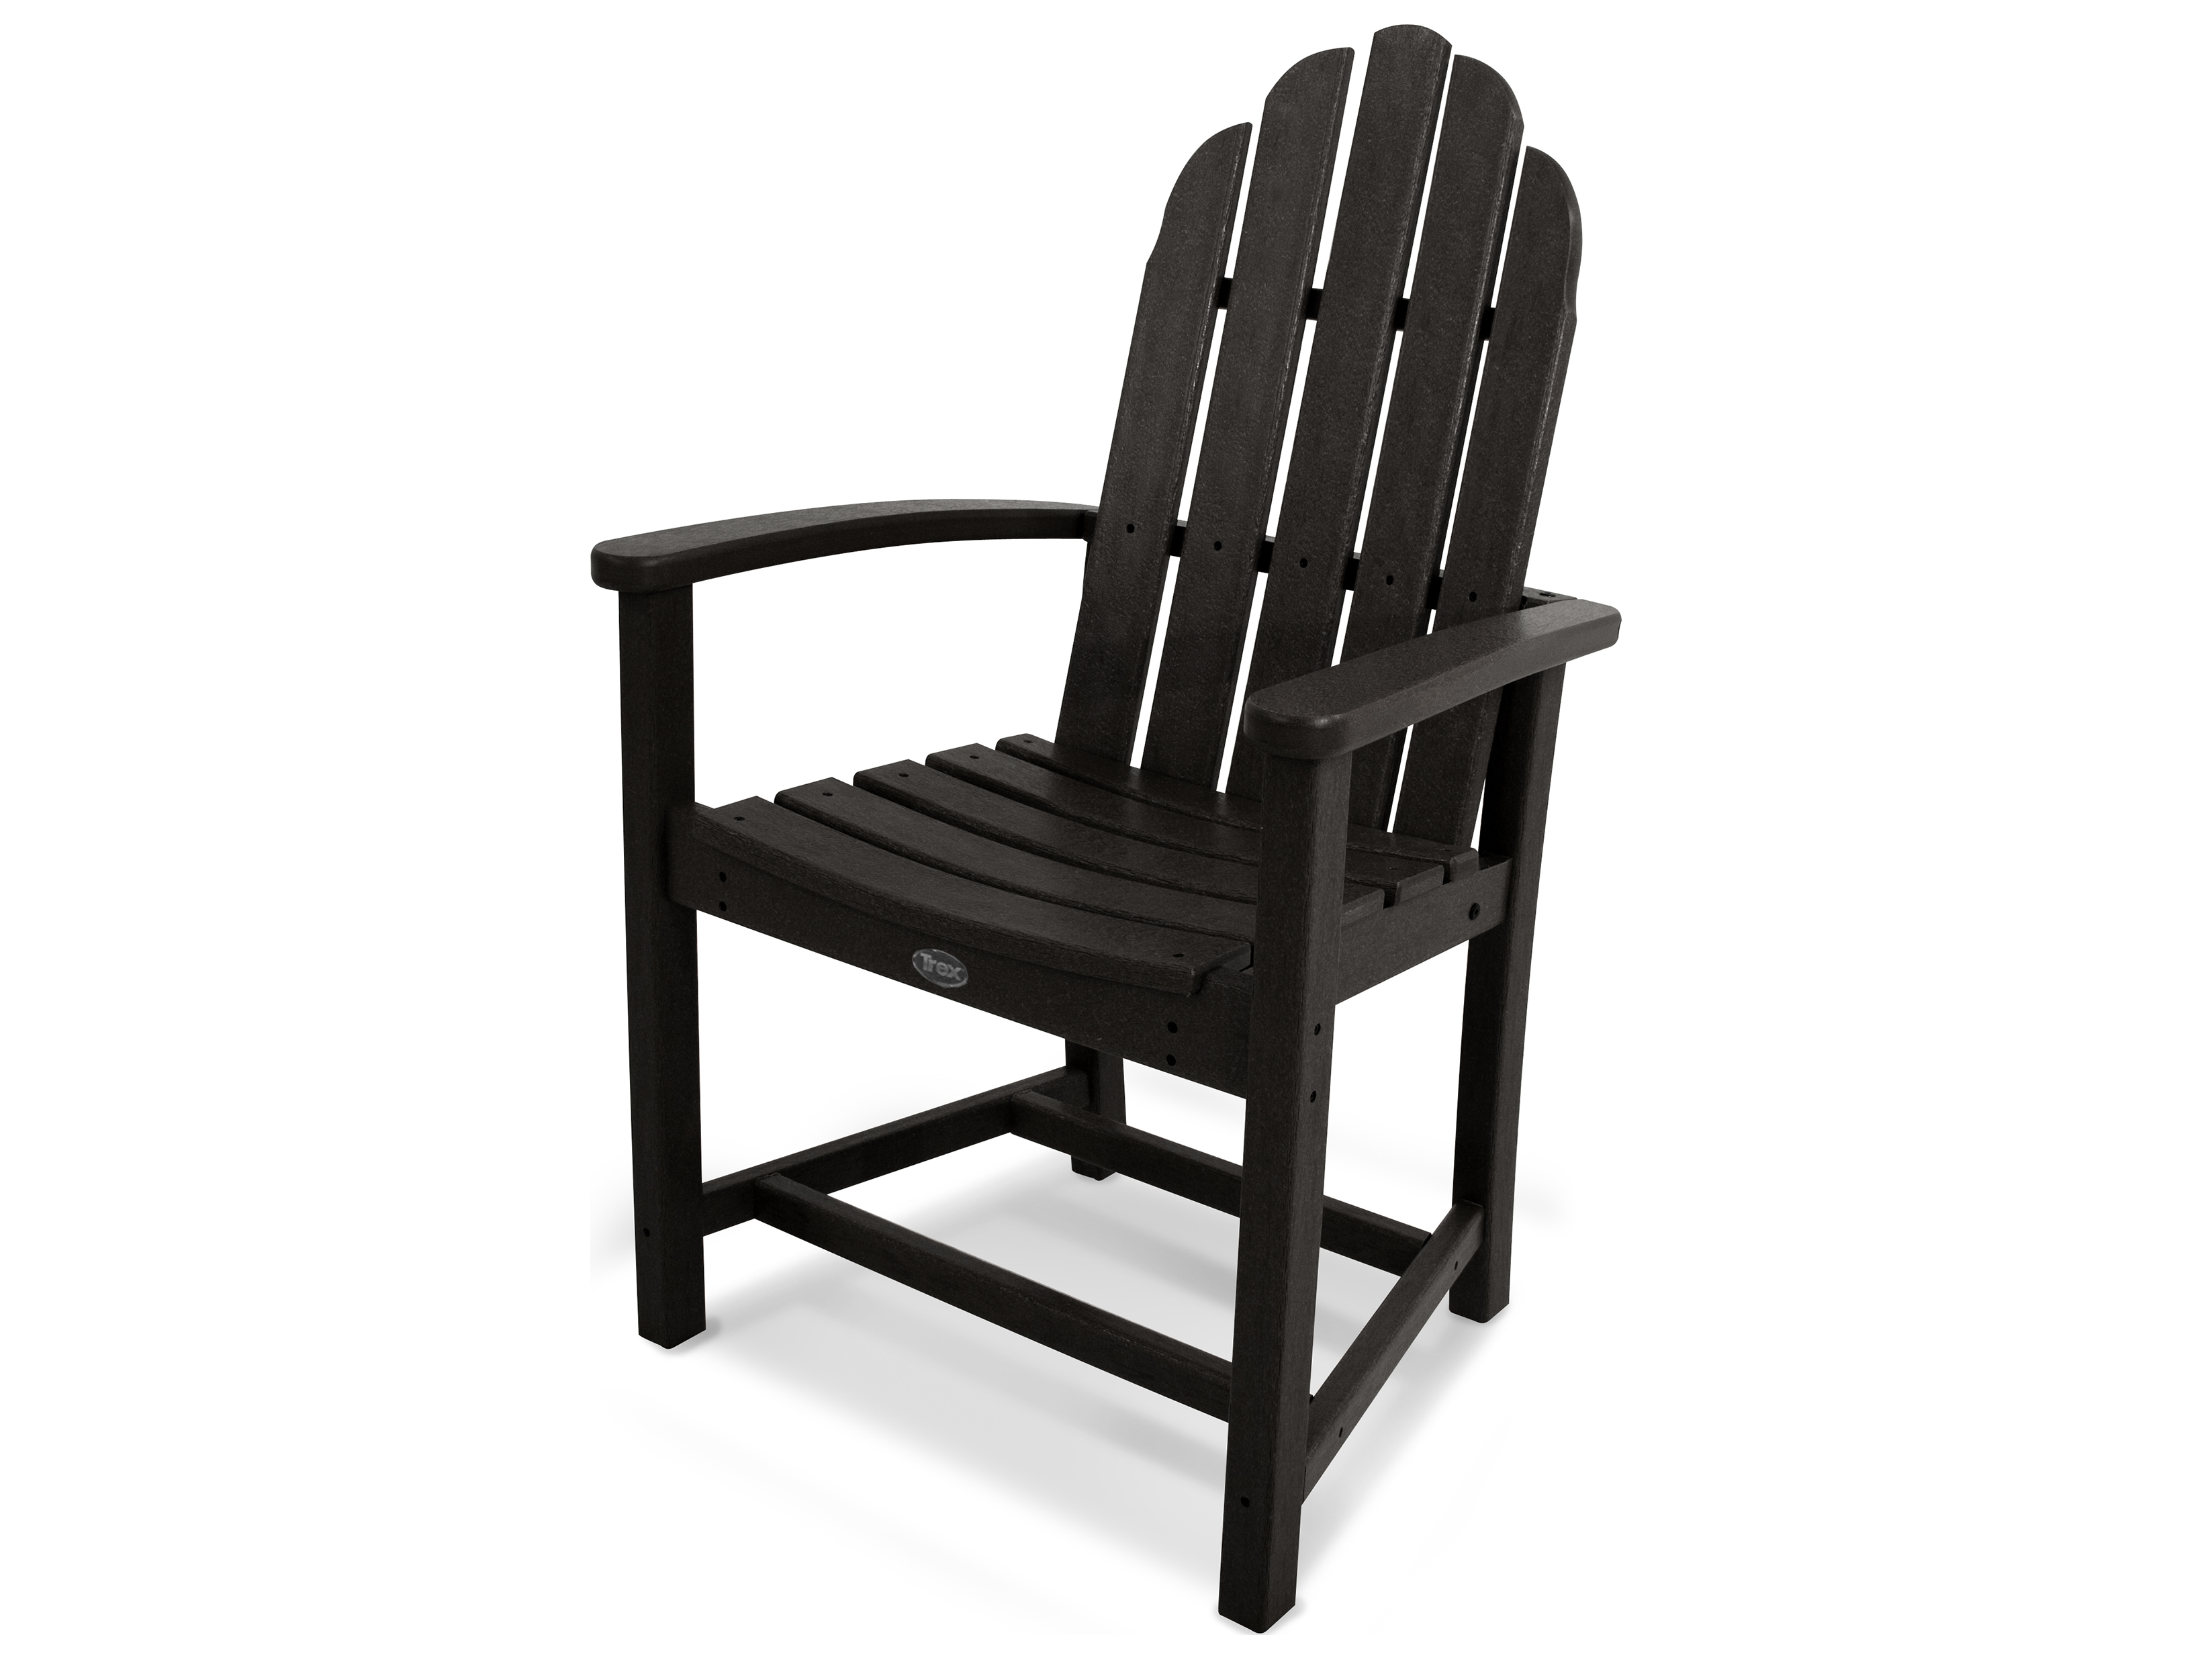 Trex® Outdoor Furniture Cape Cod Adirondack Dining Chair In Charcoal